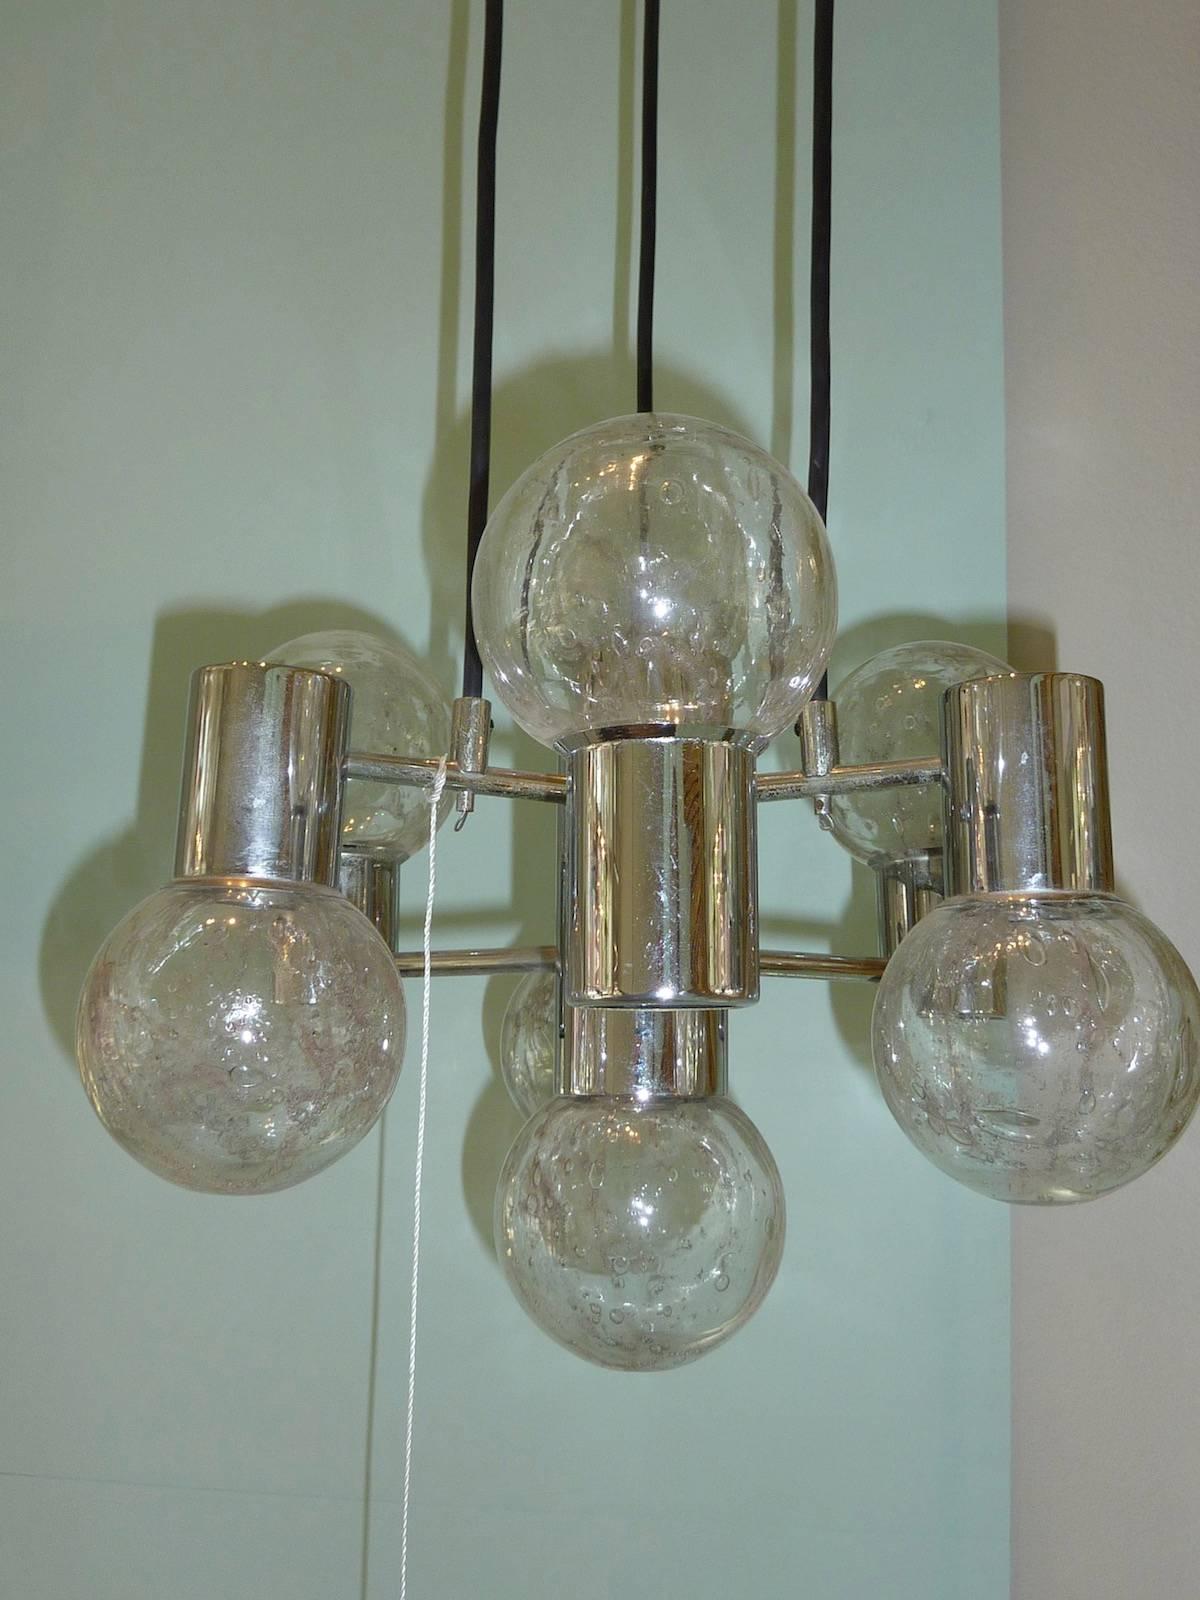 German Mid-Century Modern Chrome and Glass Pendant Light Fixture For Sale